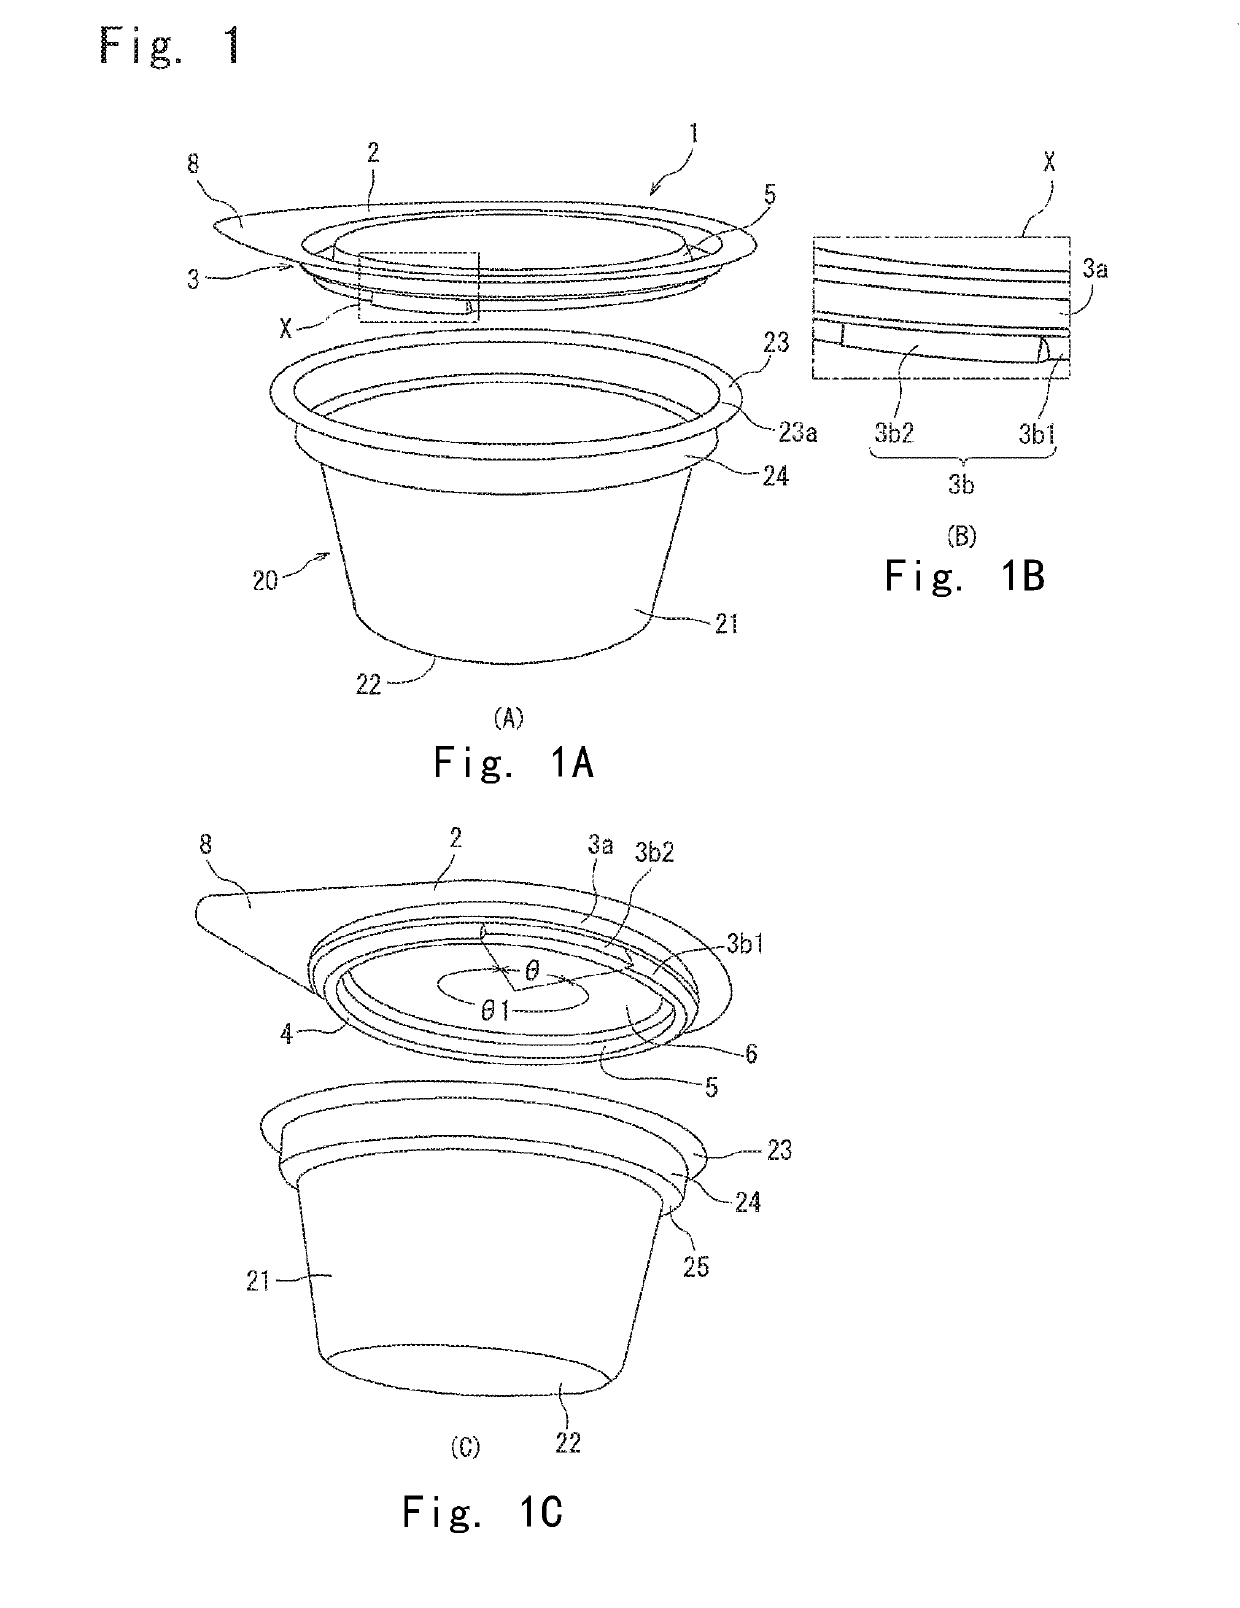 Formed lid, method for fitting the lid to container, and sealing method